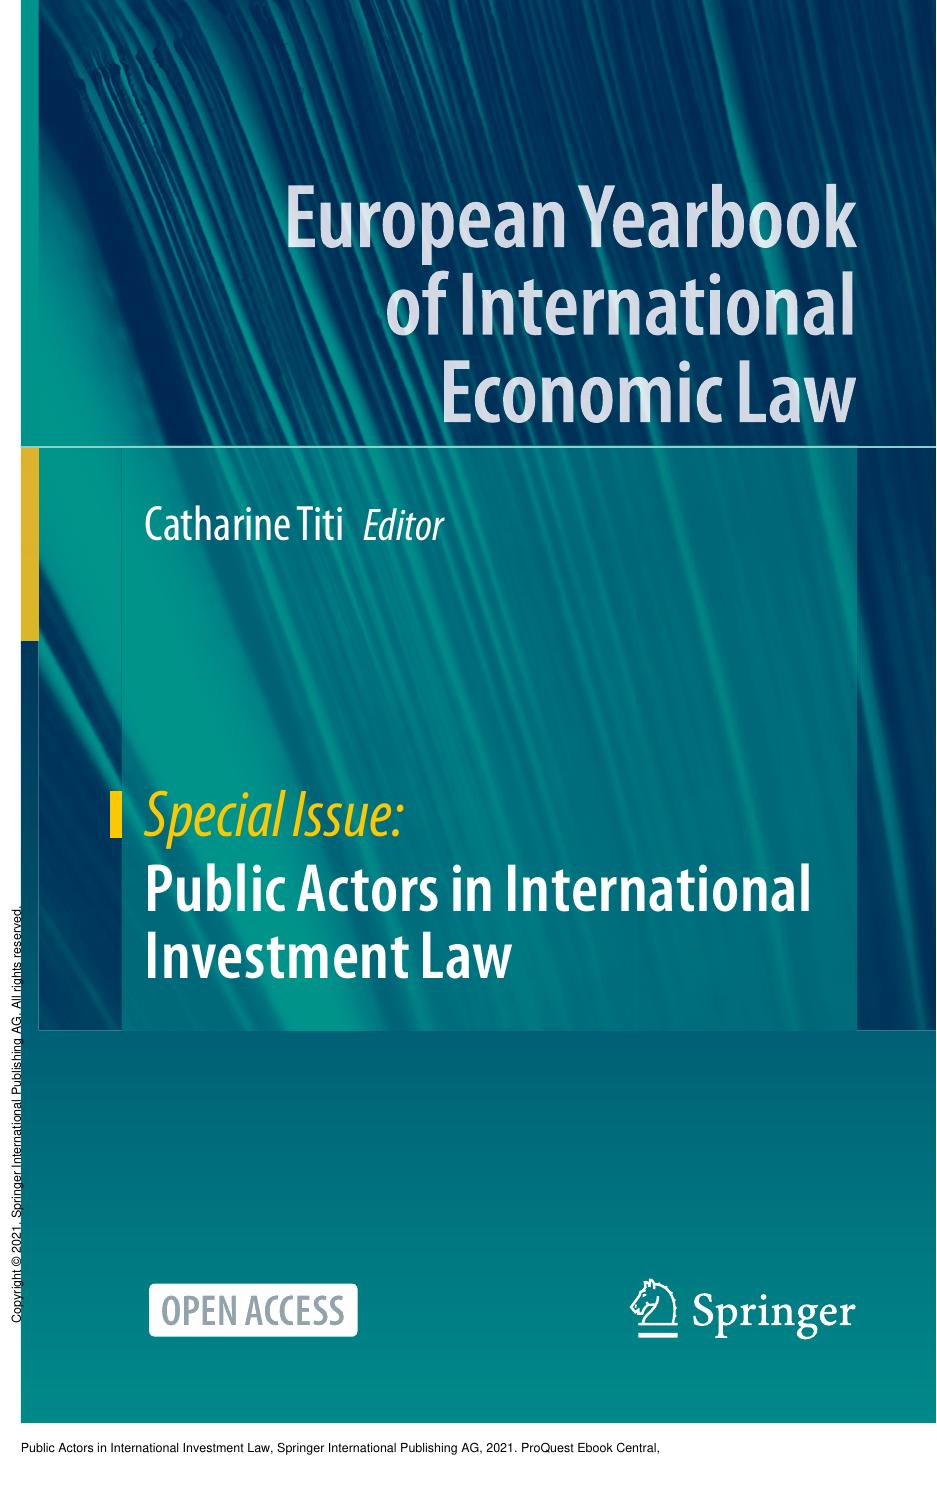 Public Actors in International Investment Law by Catharine Titi